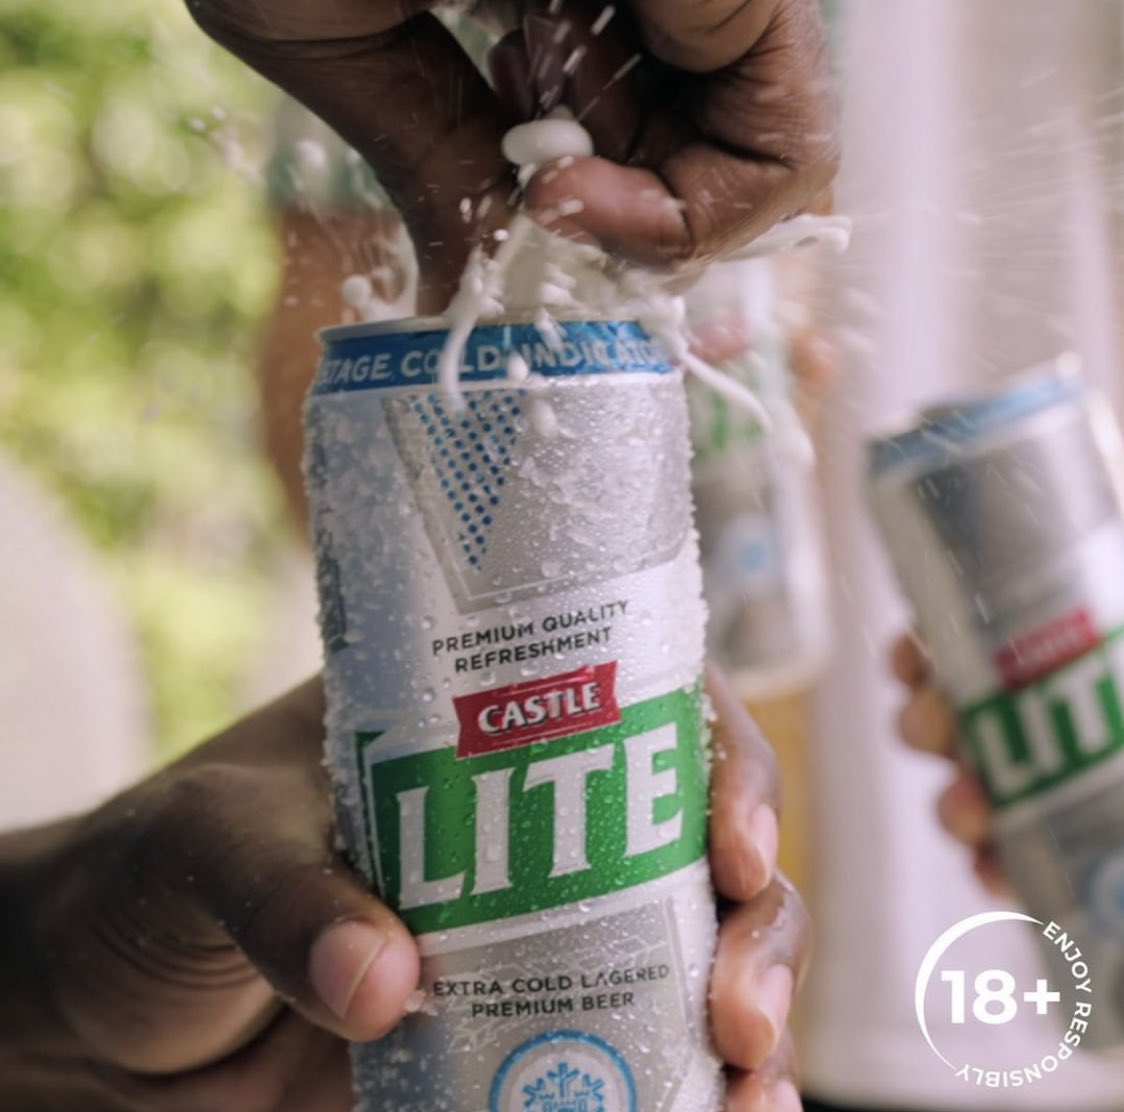 If the money that you have can’t solve your problems drink it mtase @castlelitesa 

Drink it nono 🔥🔥 sphila ka e one 🤣 don’t forget to tip our lovely bartenders 👏 #CastleLite 
#TipsonTap